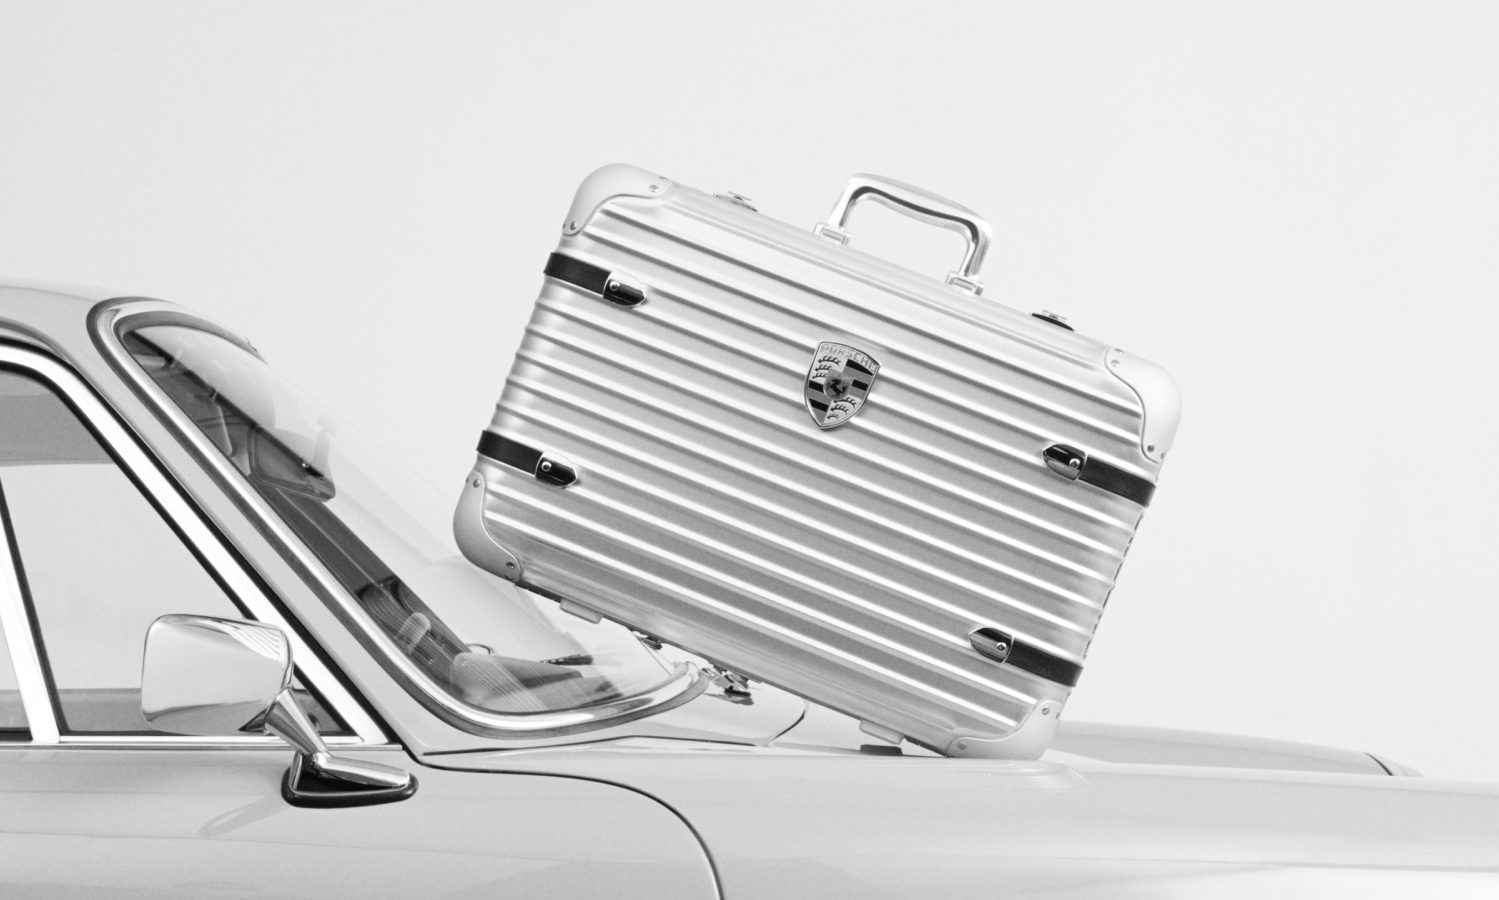 The 2022 Rimowa x Porsche limited edition collection will make you want to travel again